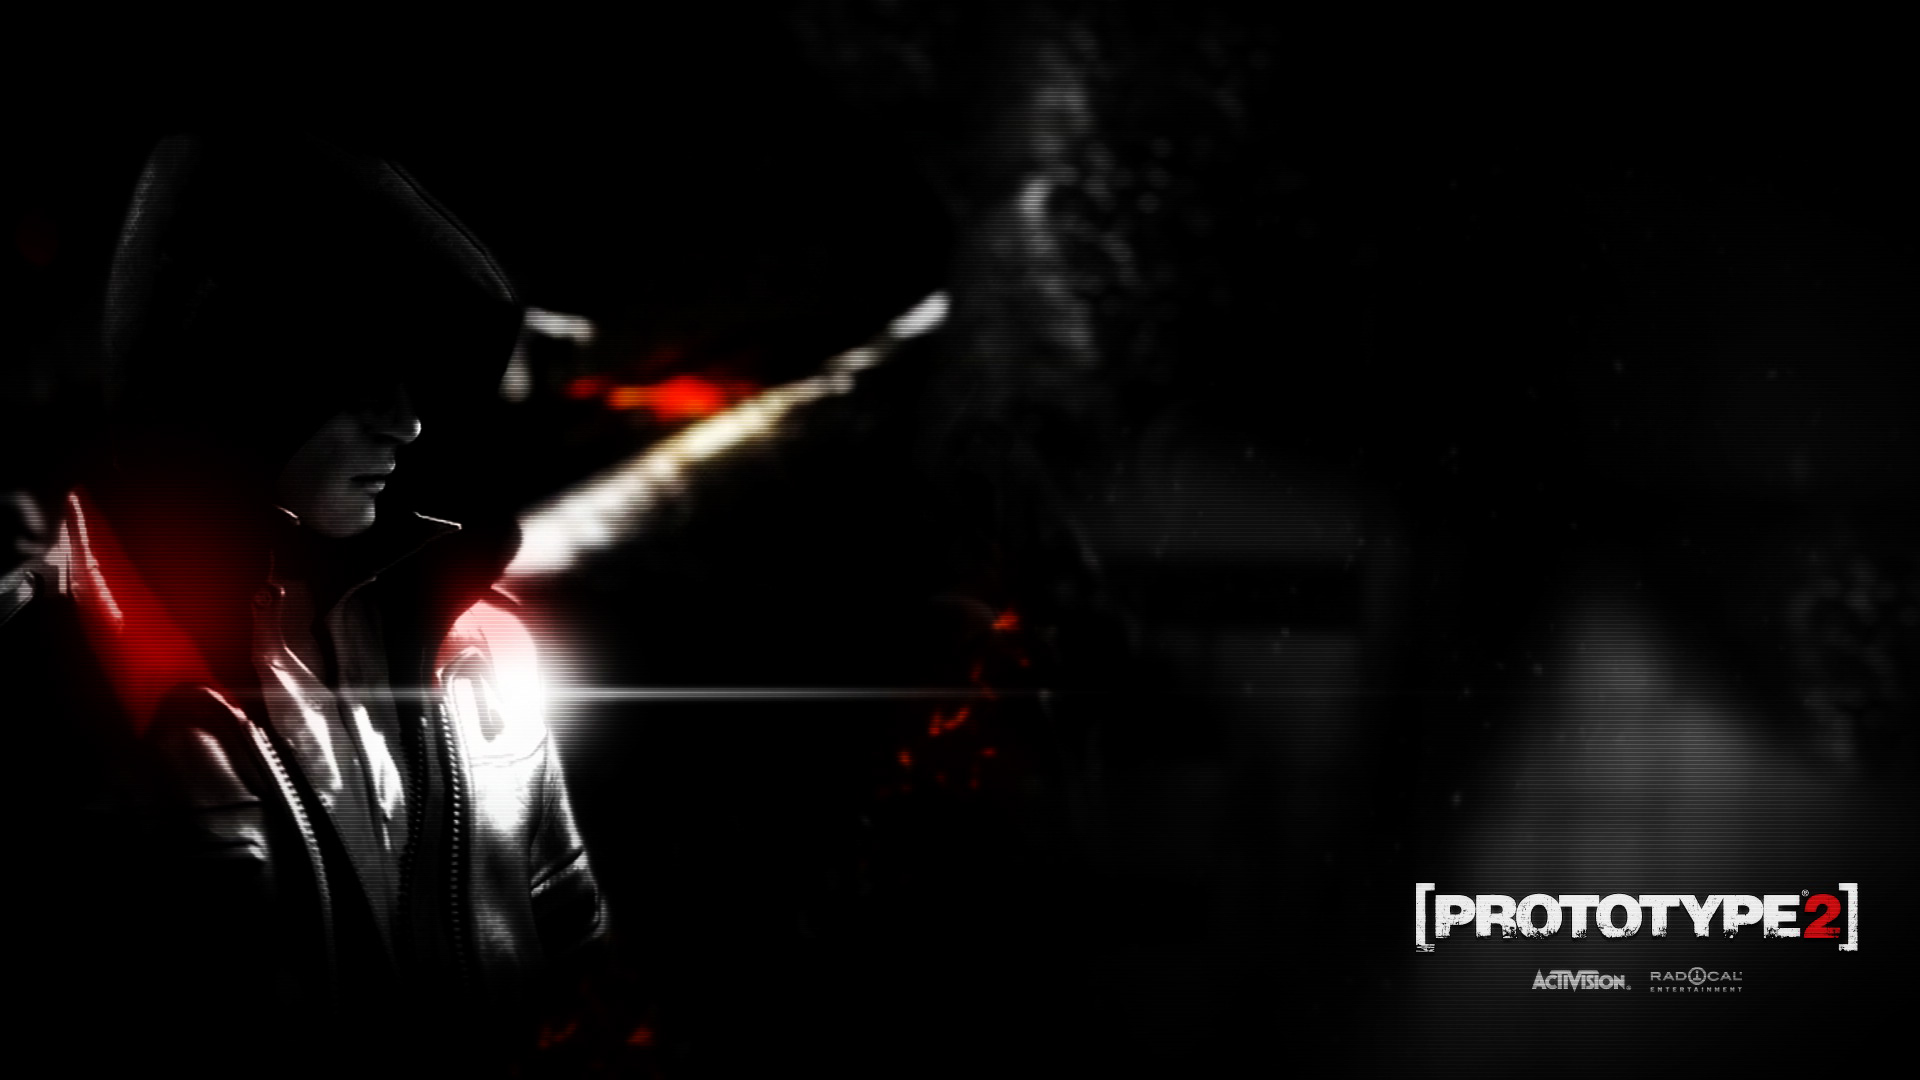  wallpapers of Prototype 2 You are downloading Prototype 2 wallpaper